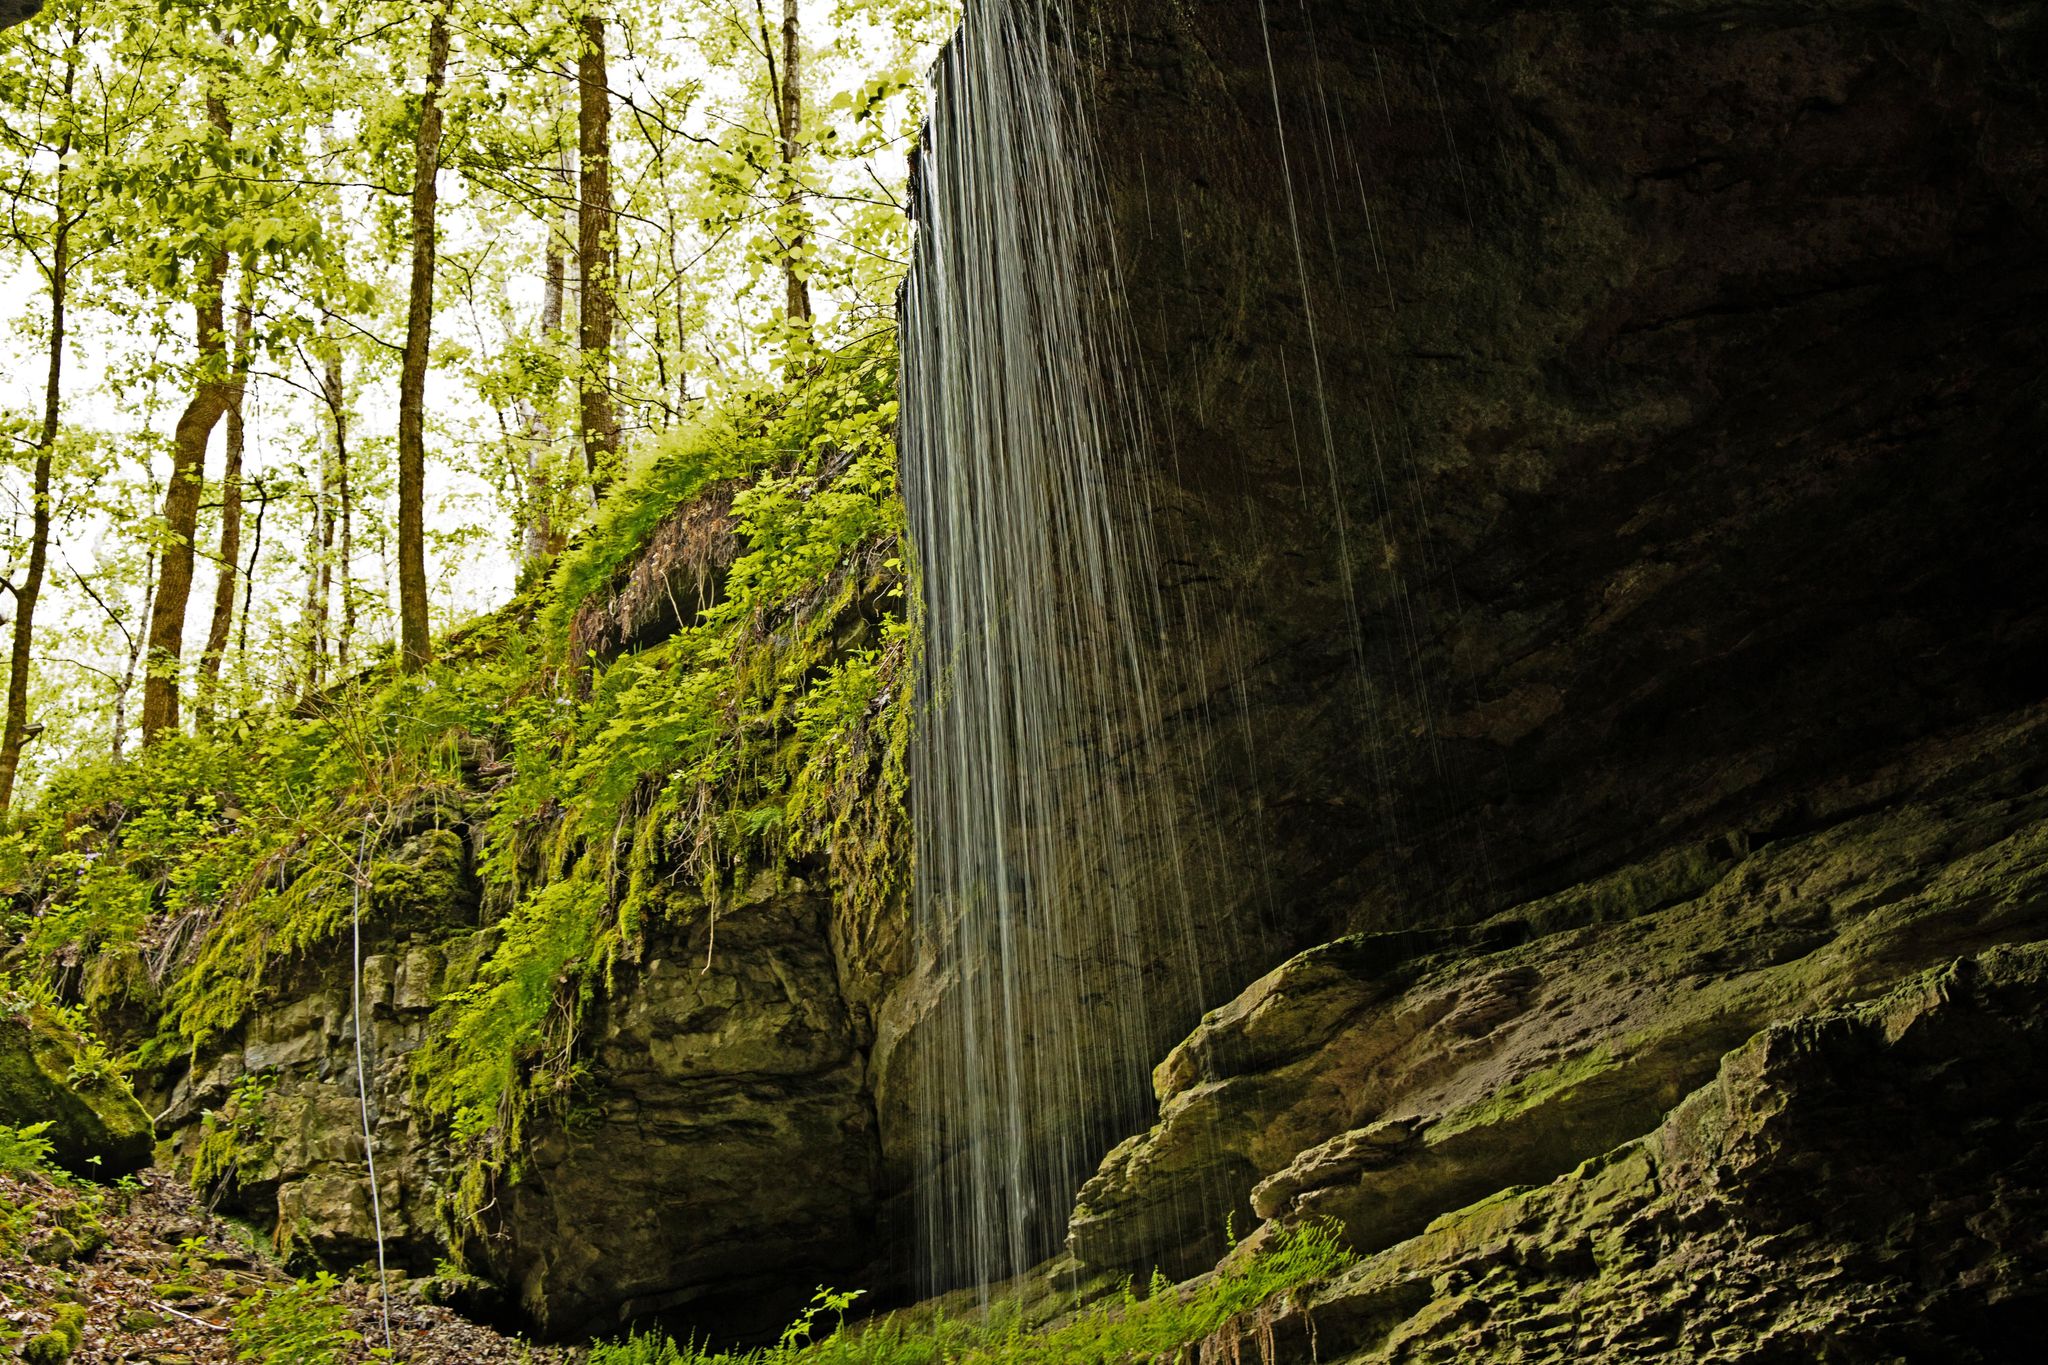 The sound of falling water welcomes visitors into the natural entrance of Mammoth Cave.